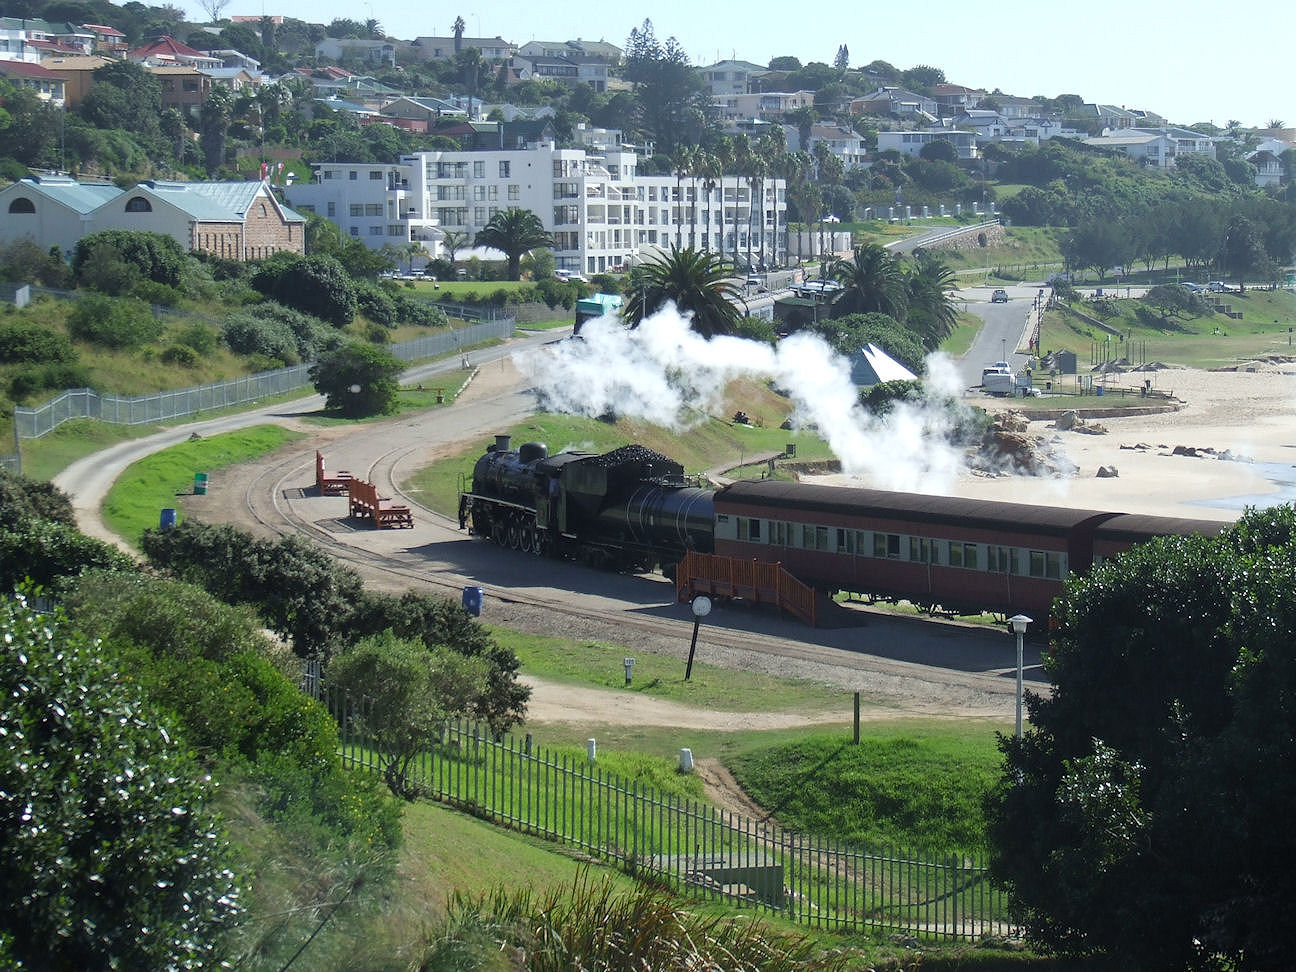 an image of a steam train going down the tracks